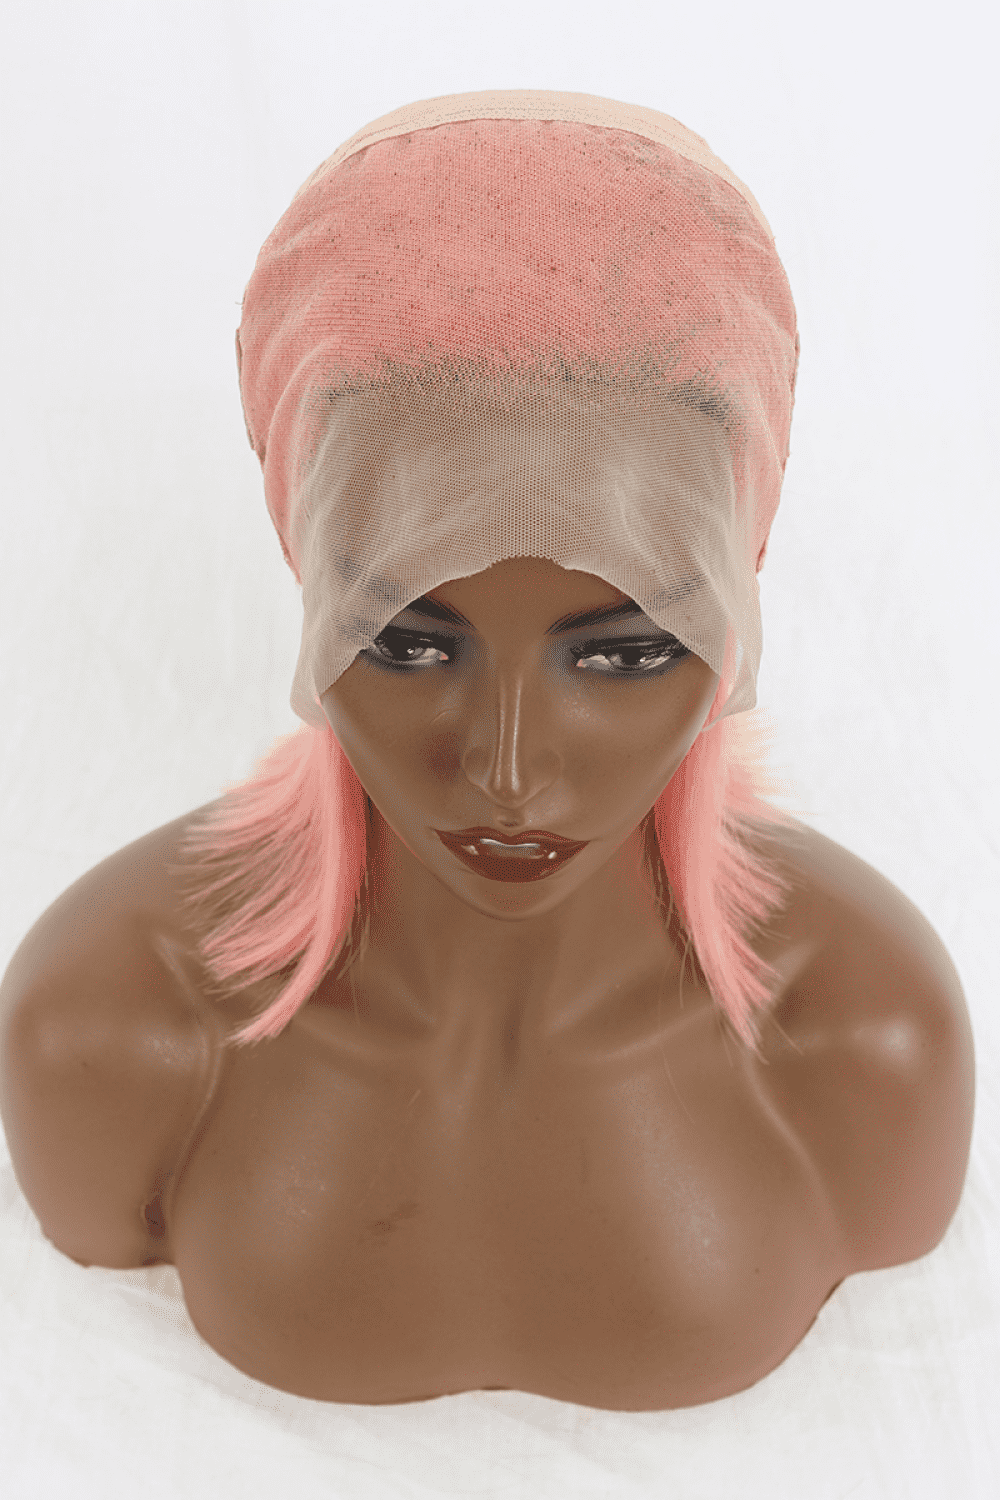 a mannequin head with a pink wig on top of it